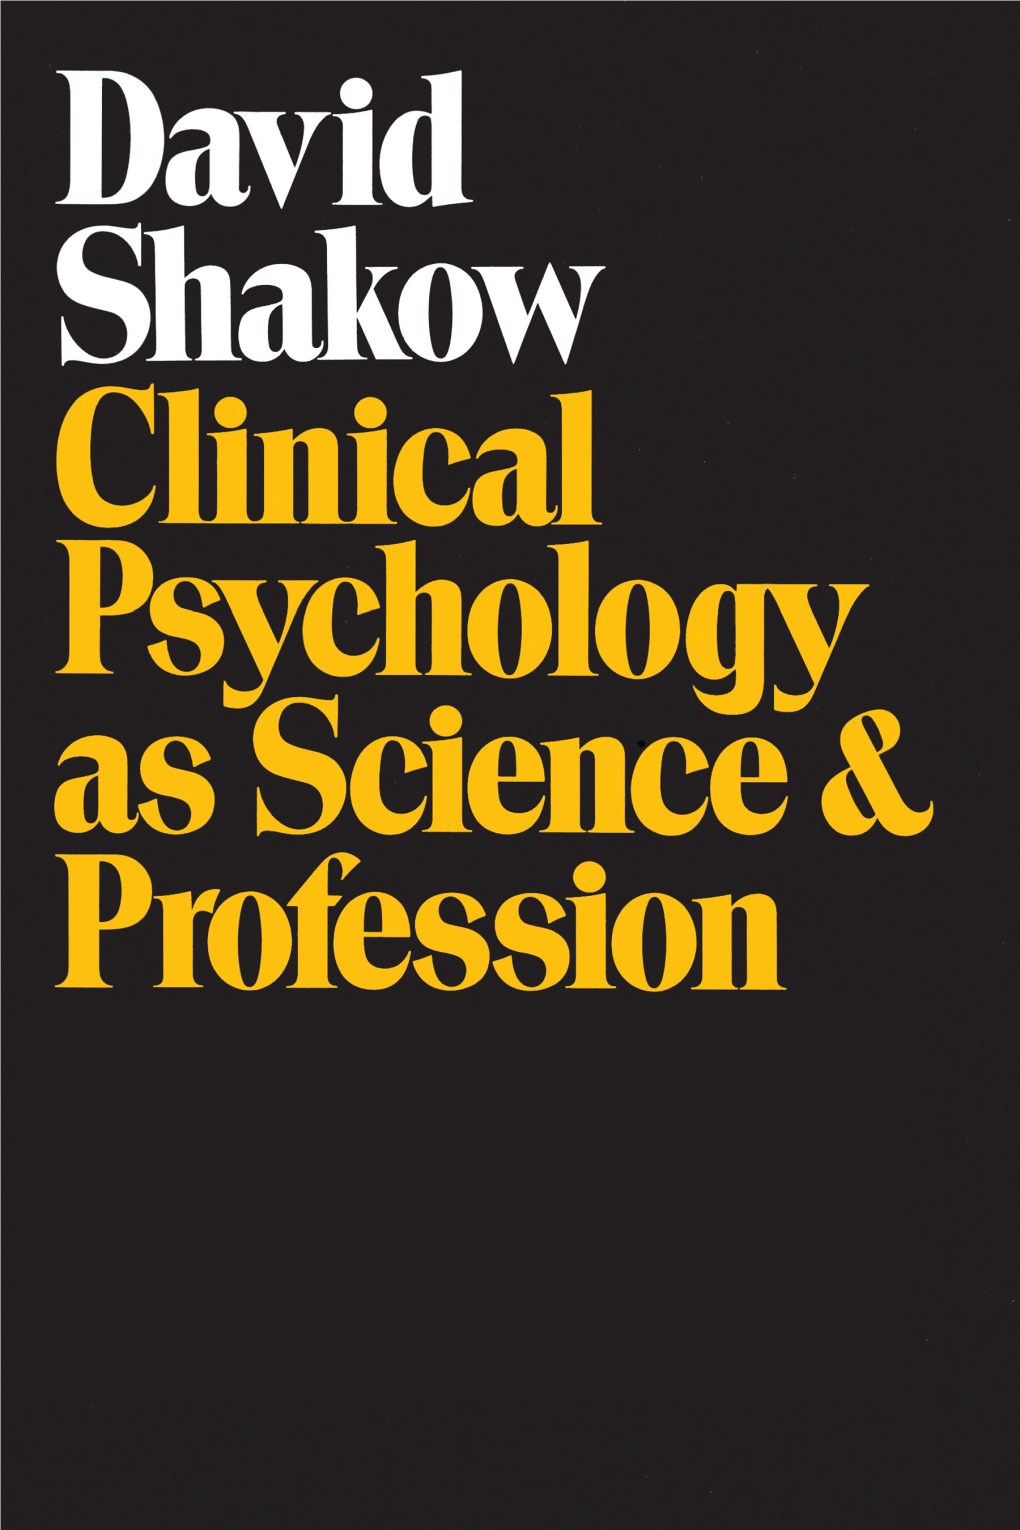 Clinical Psychology As Science and Profession / David Shakow